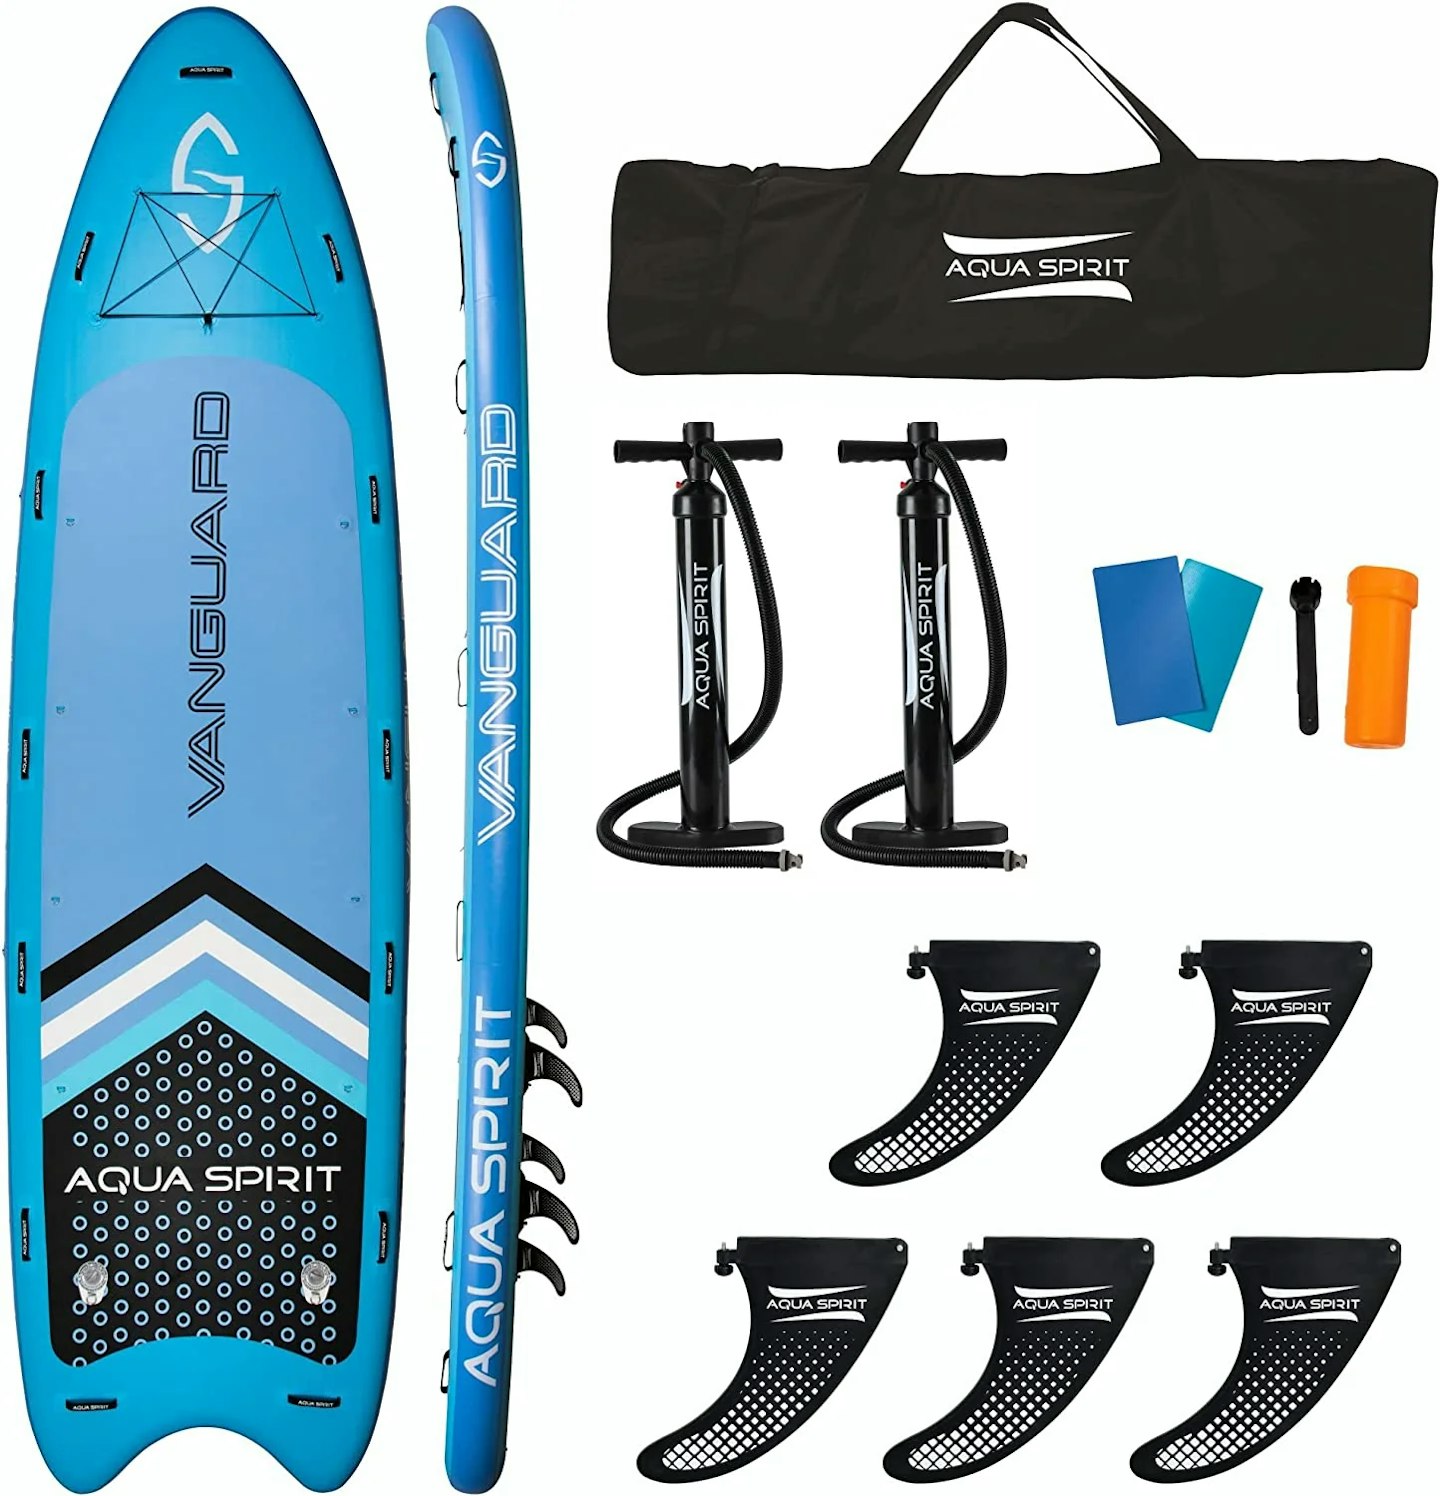 paddleboard kit for families or groups